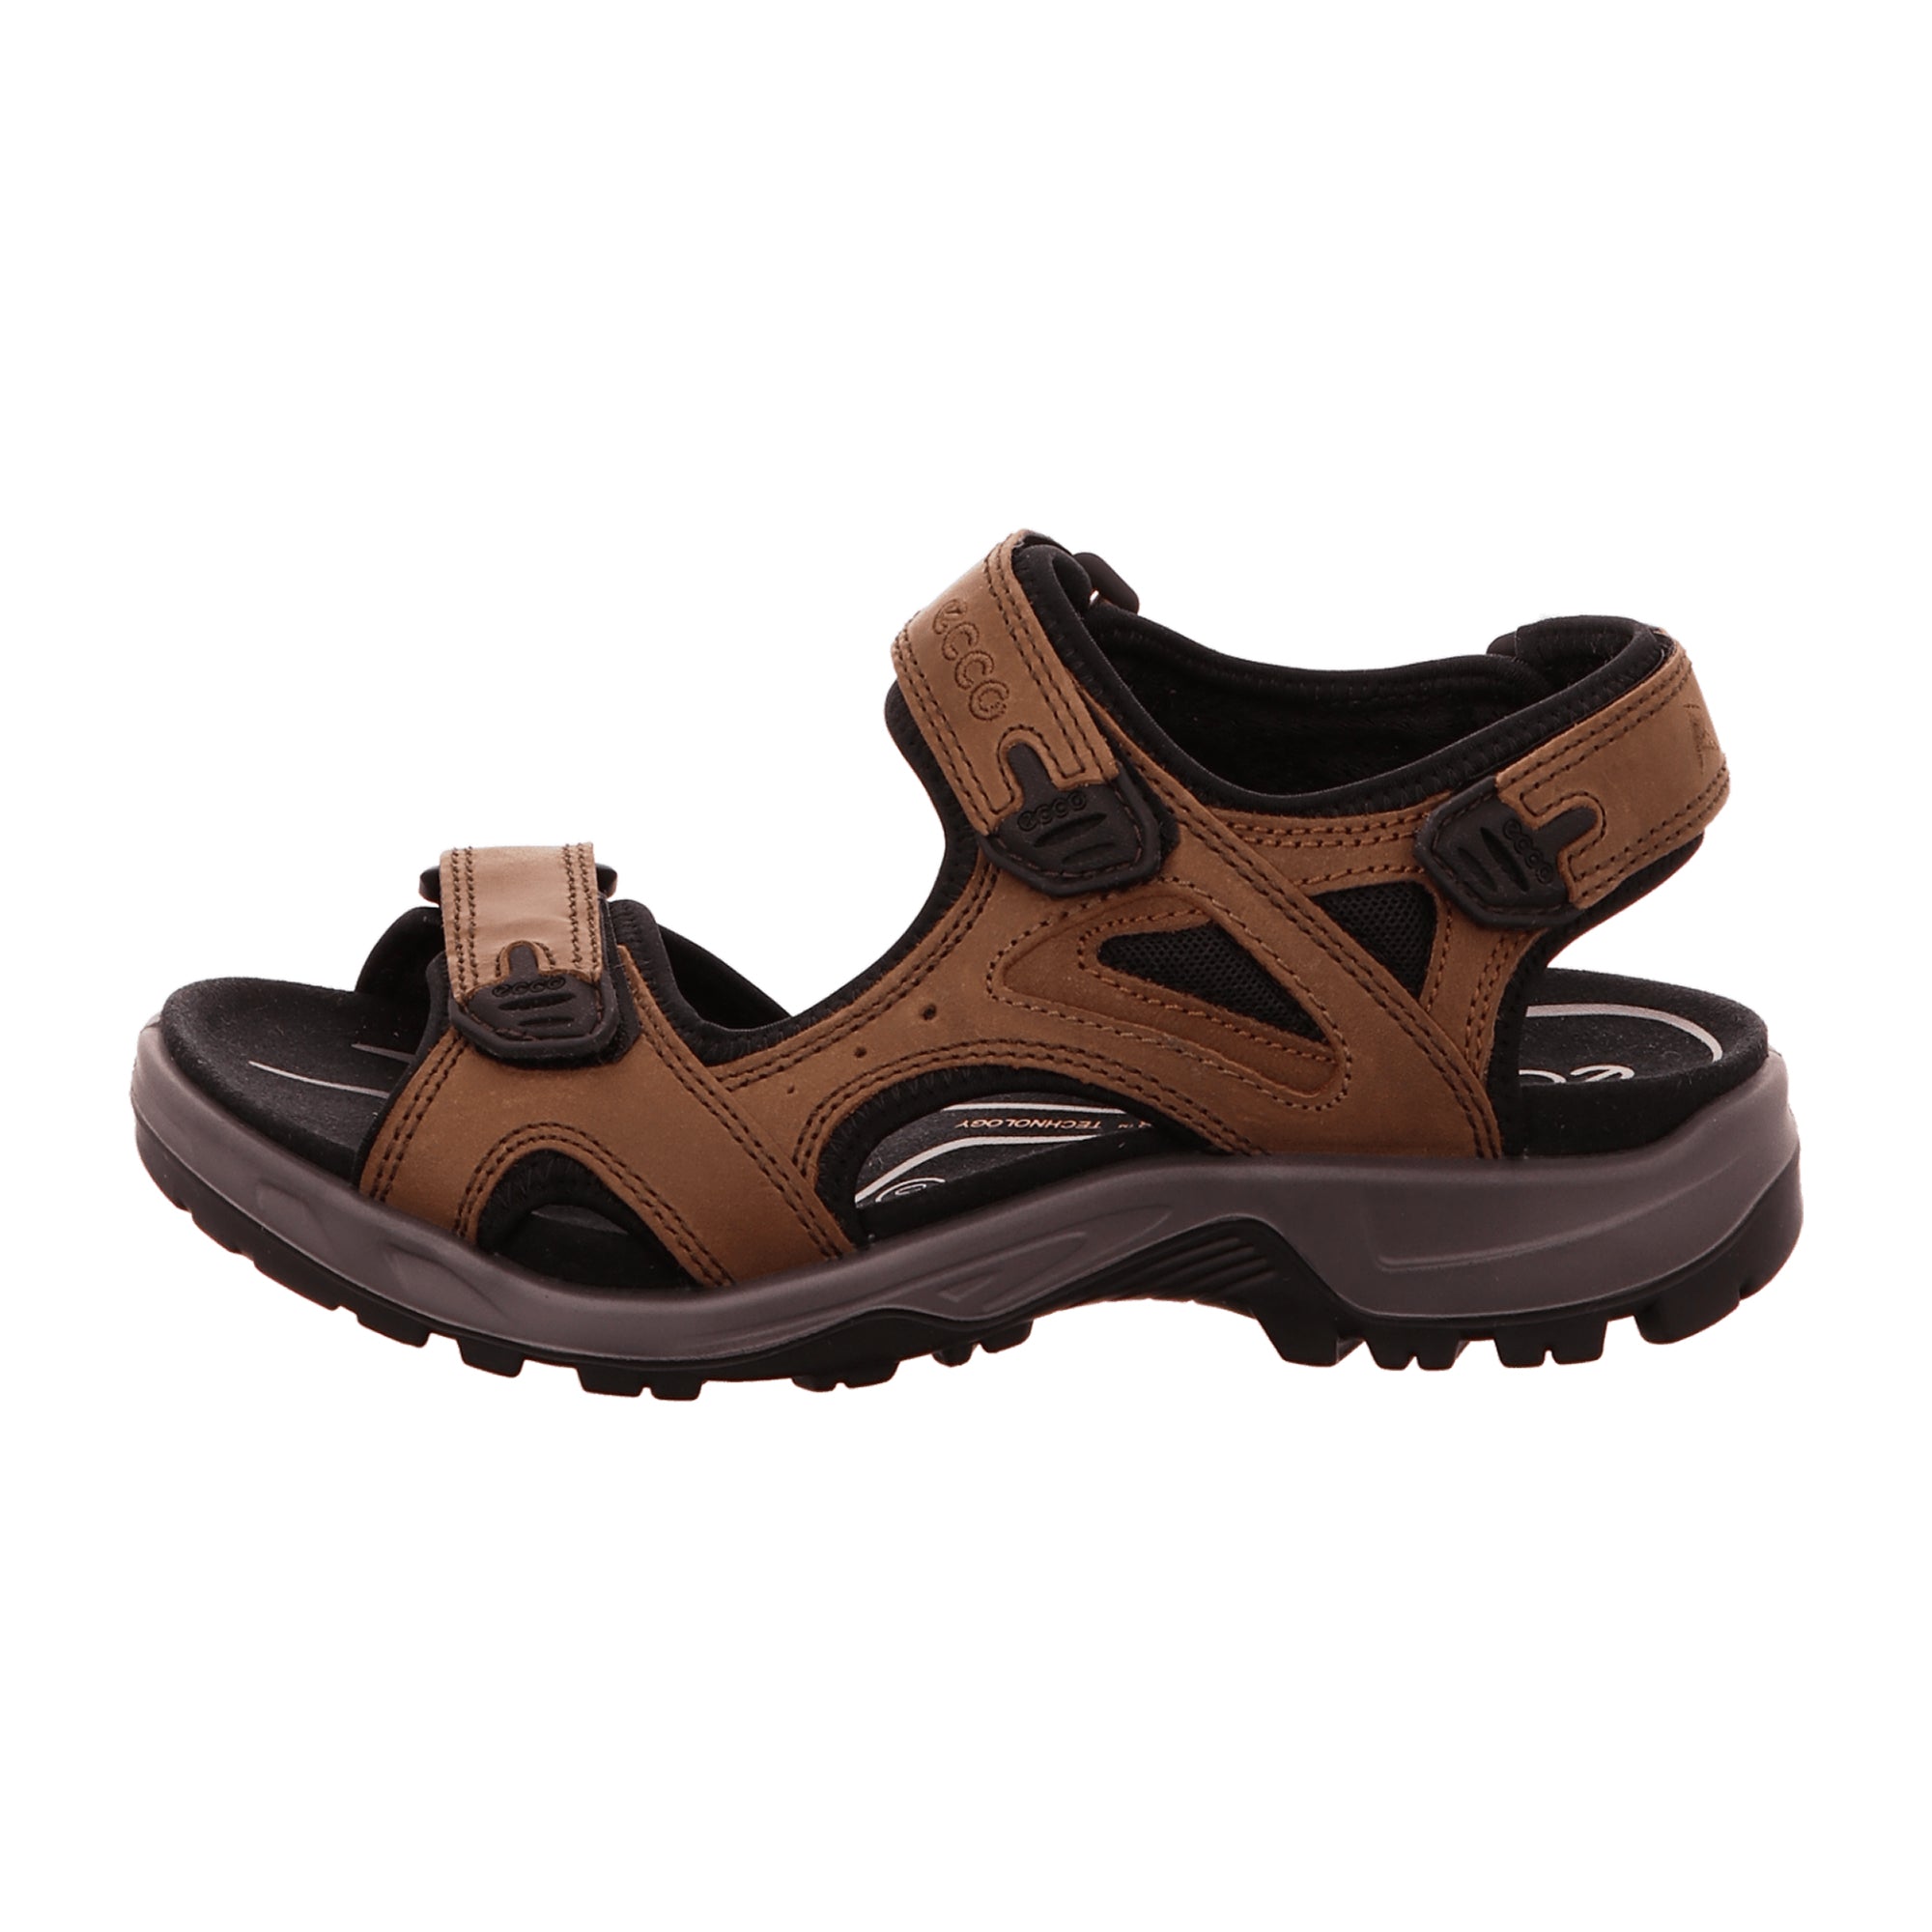 Ecco OFFROAD Men's Outdoor Sandals, Durable Brown Leather - Adventure Ready